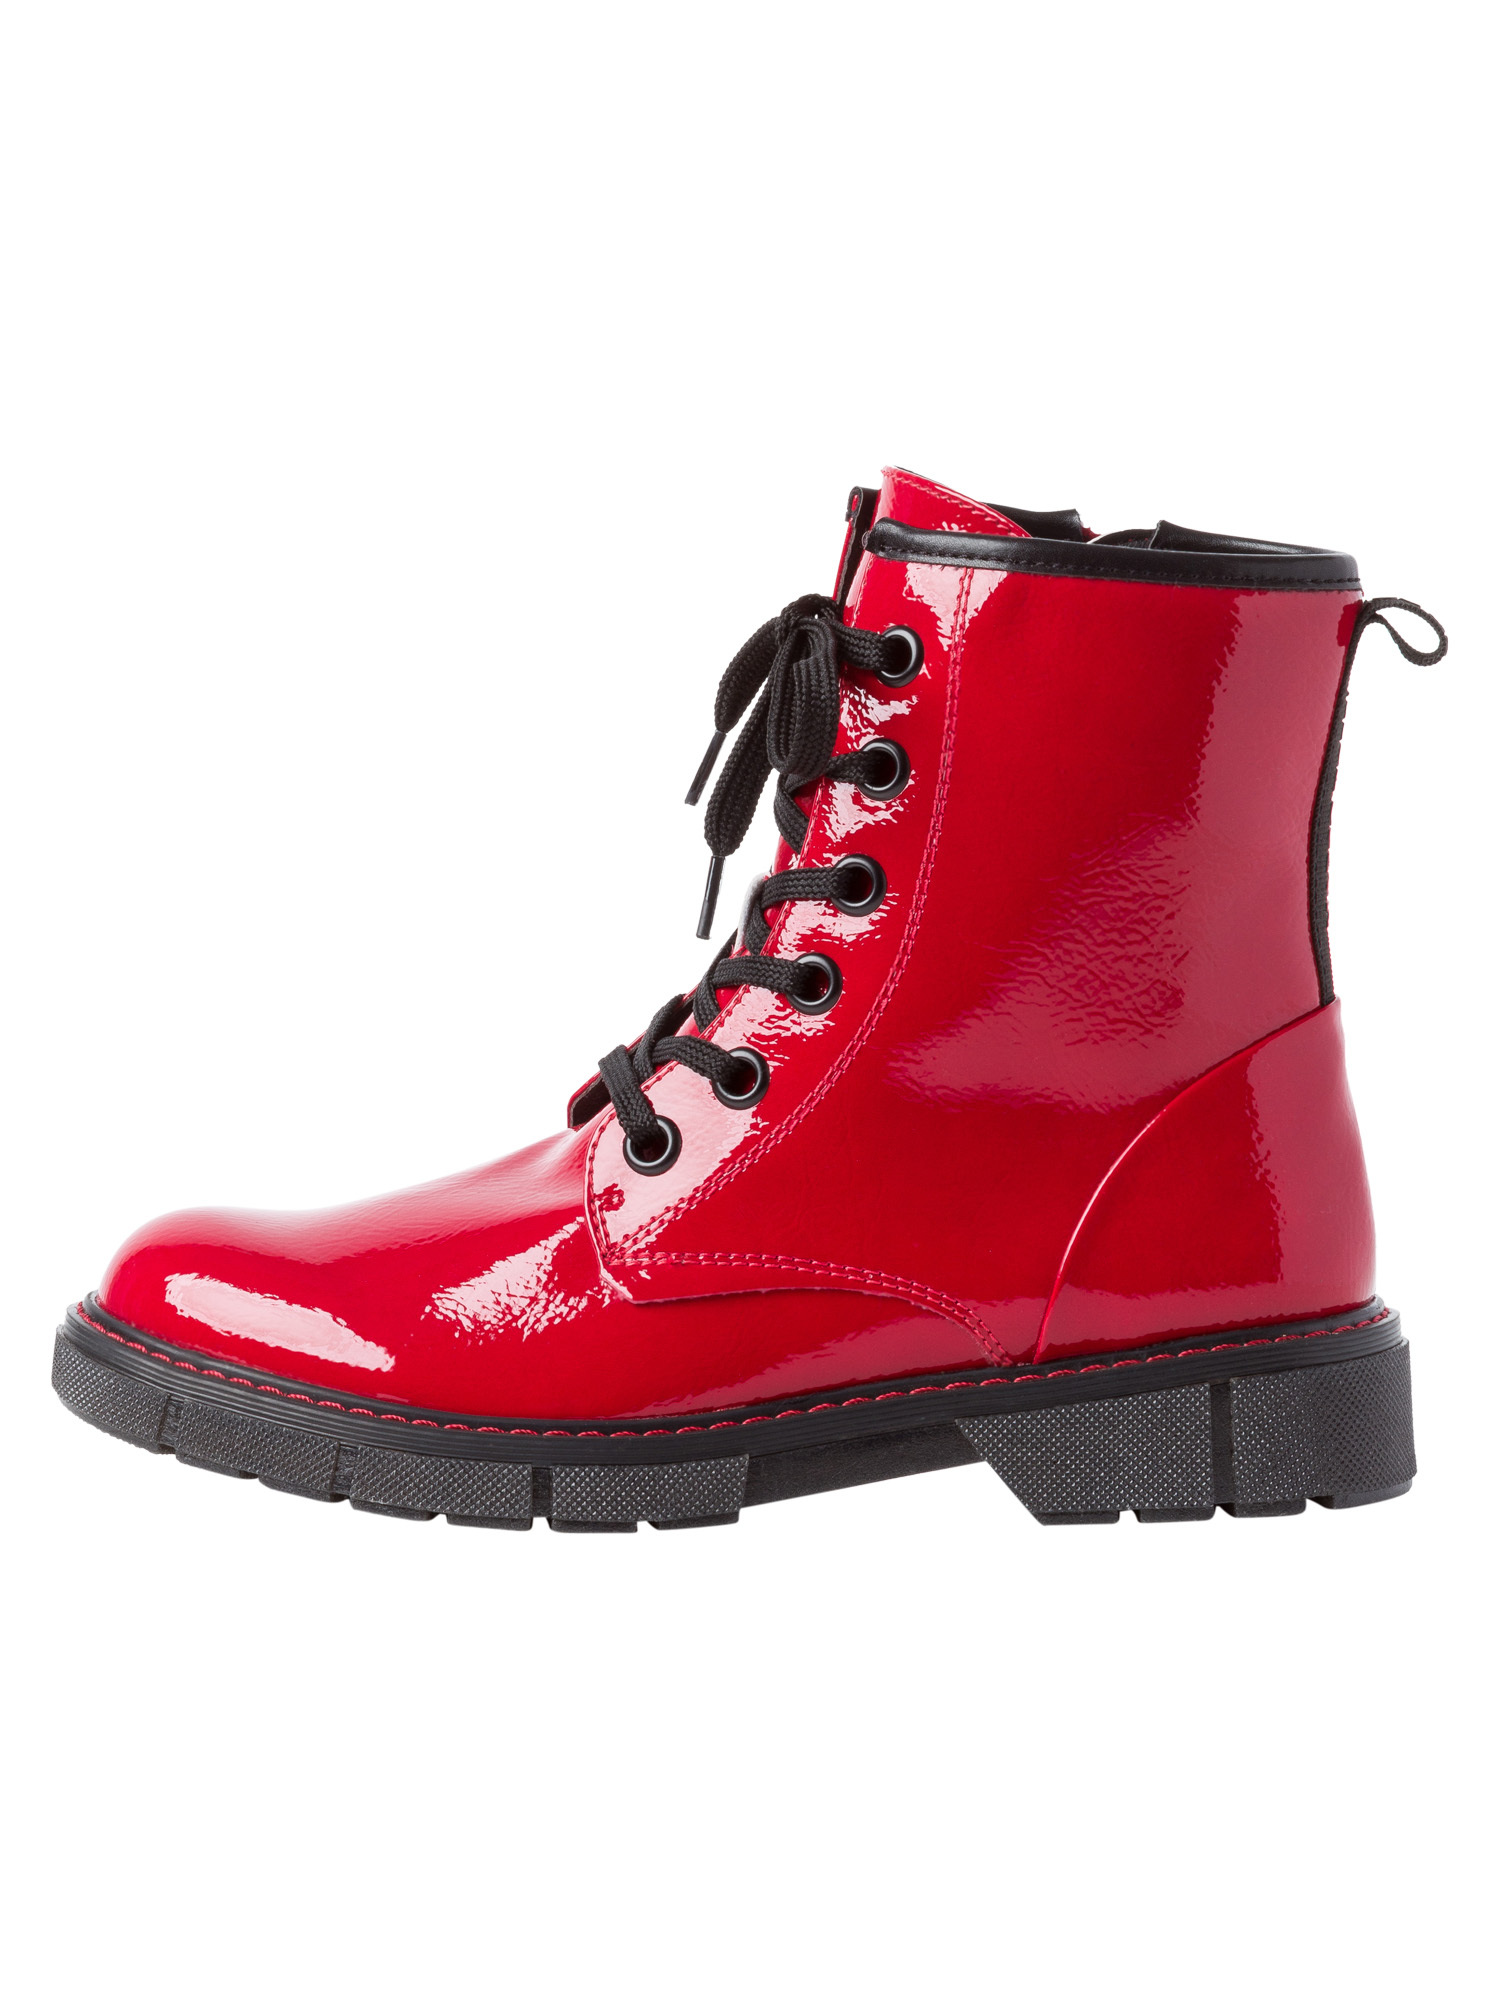 MARCO TOZZI Stiefelette in Rot 